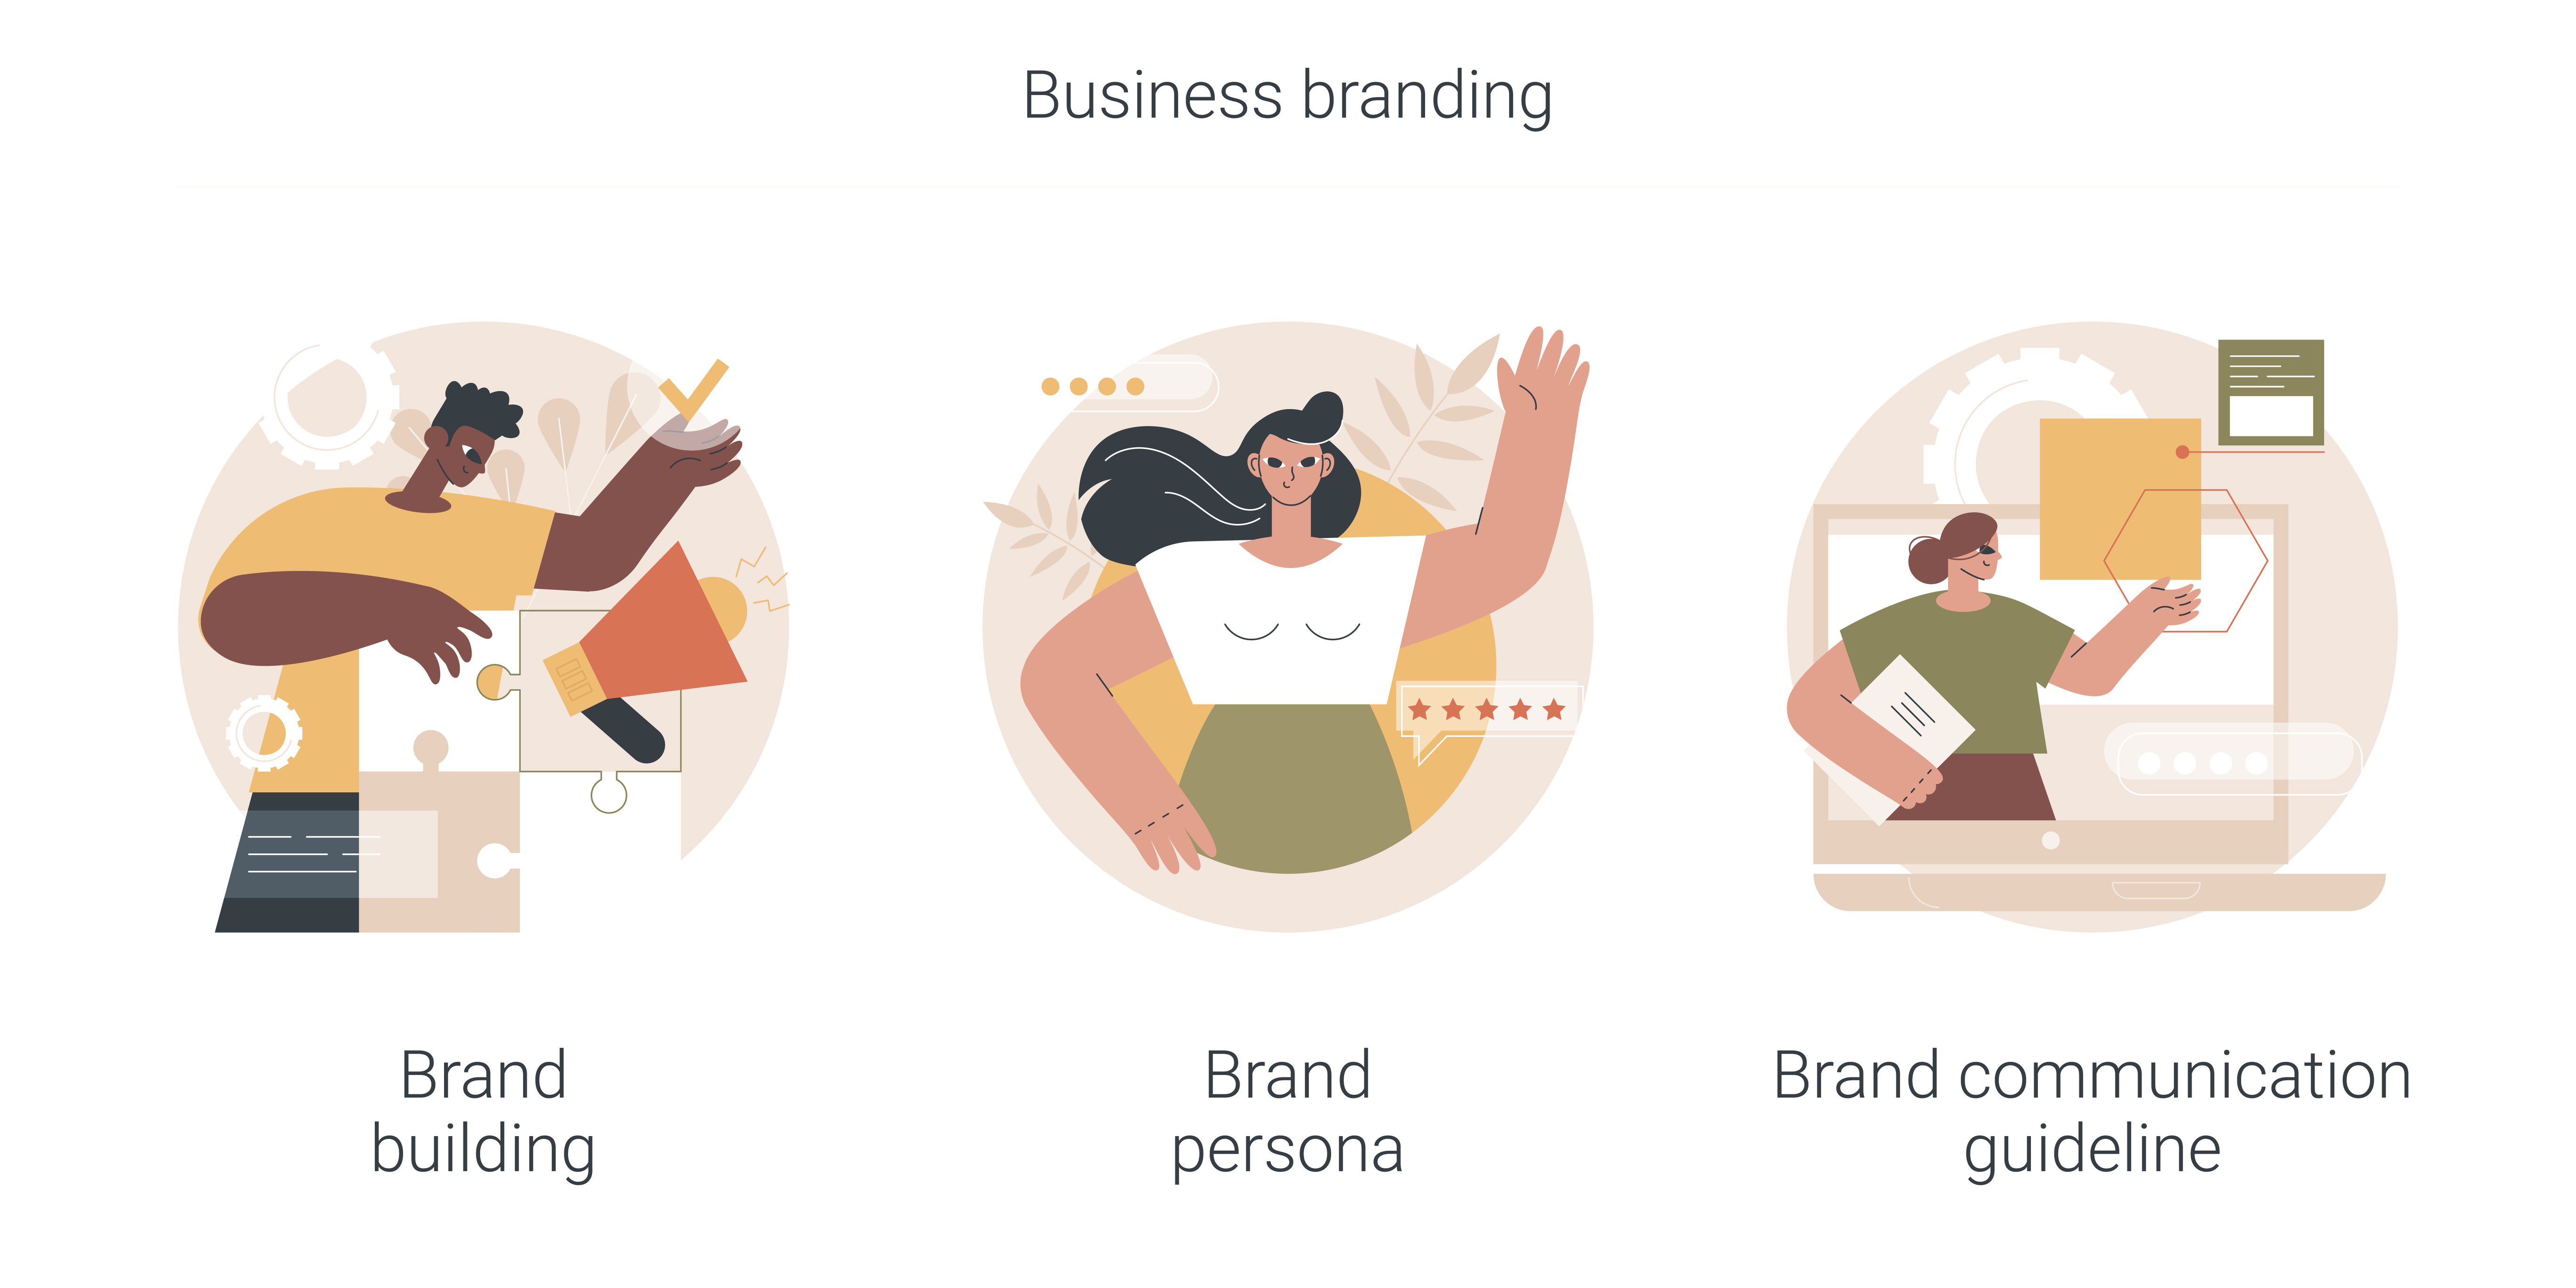 Brand persona is one of the three building blocks of business branding, along with brand building and brand communication guideline